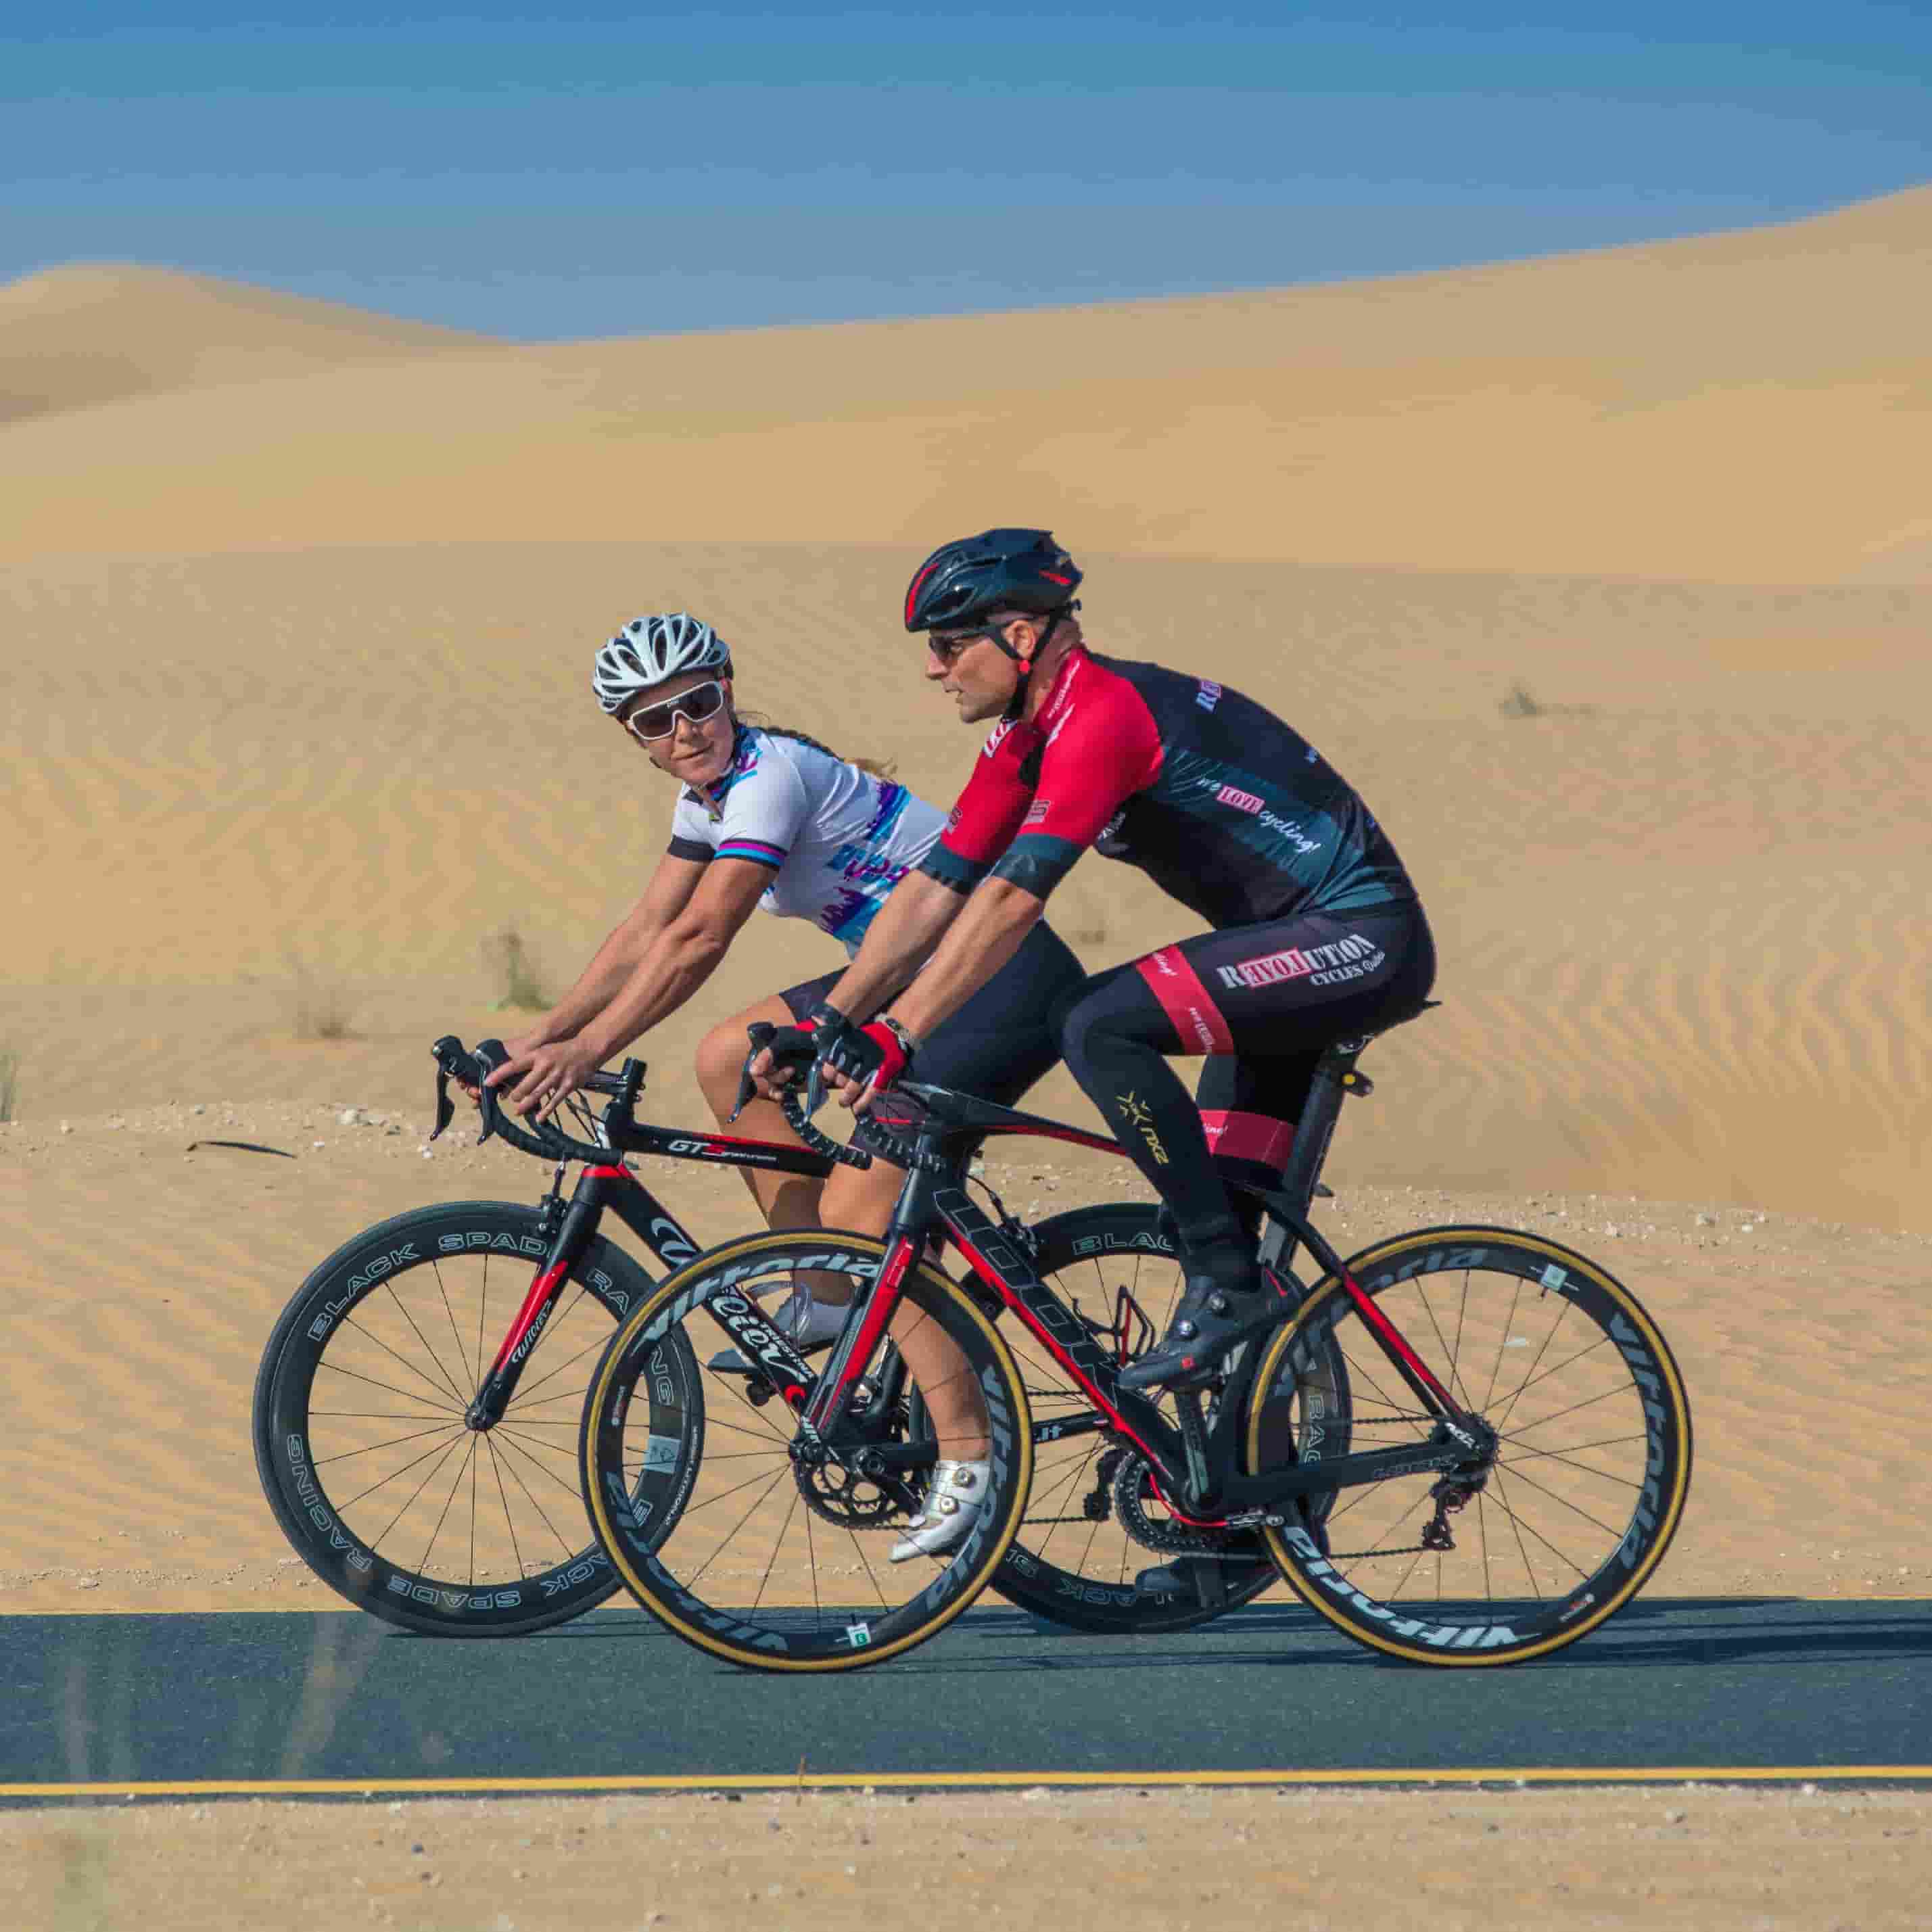 Cycling on a road in the Dubai desert